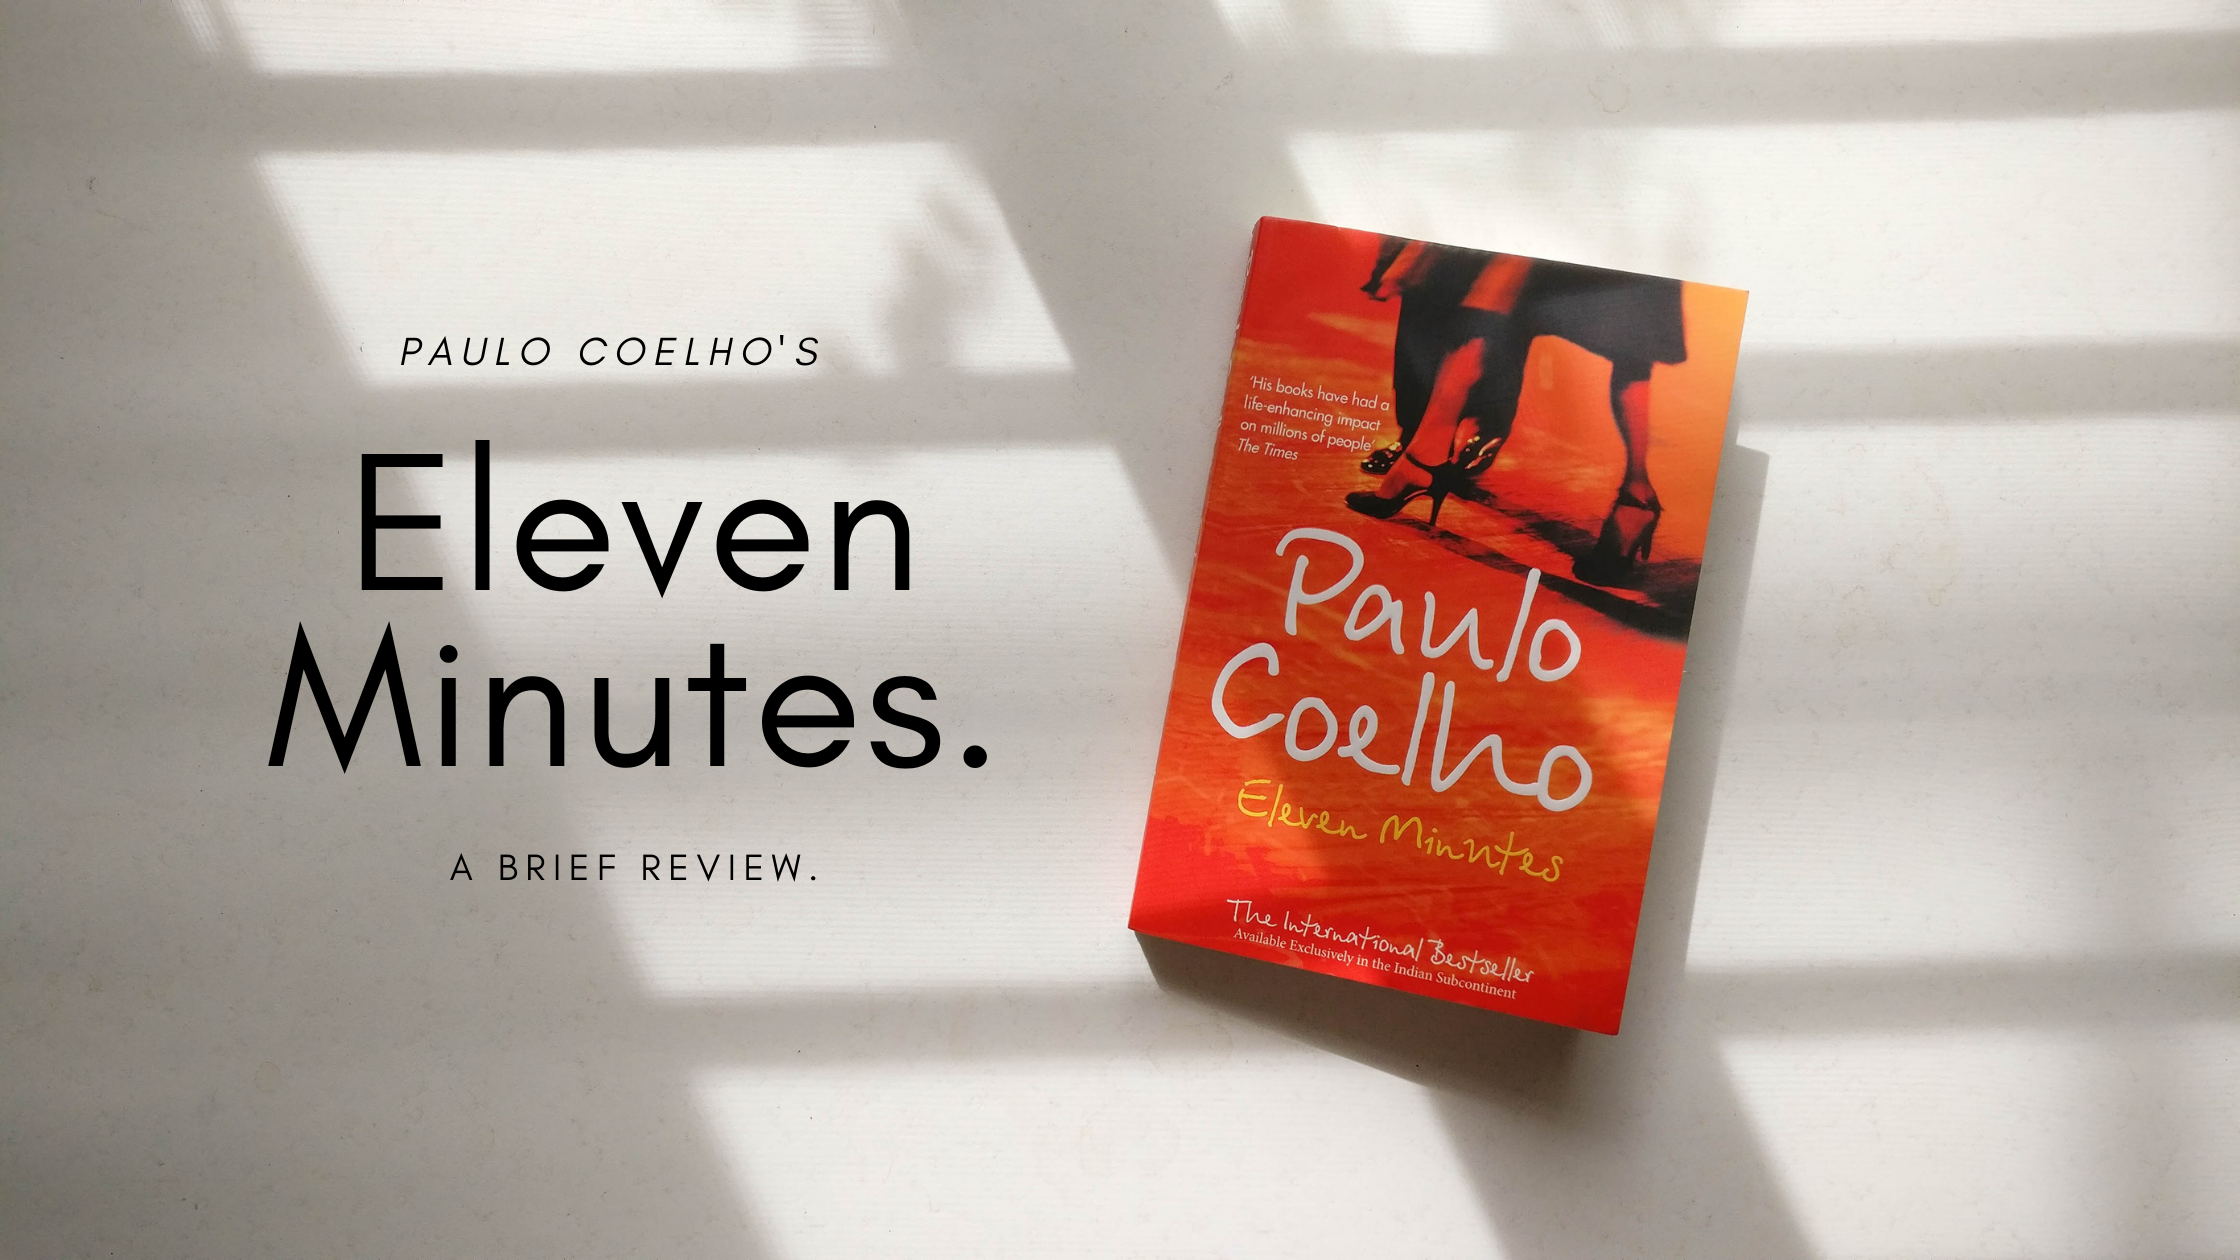 Eleven minutes by Paulo Coelho | A brief review.